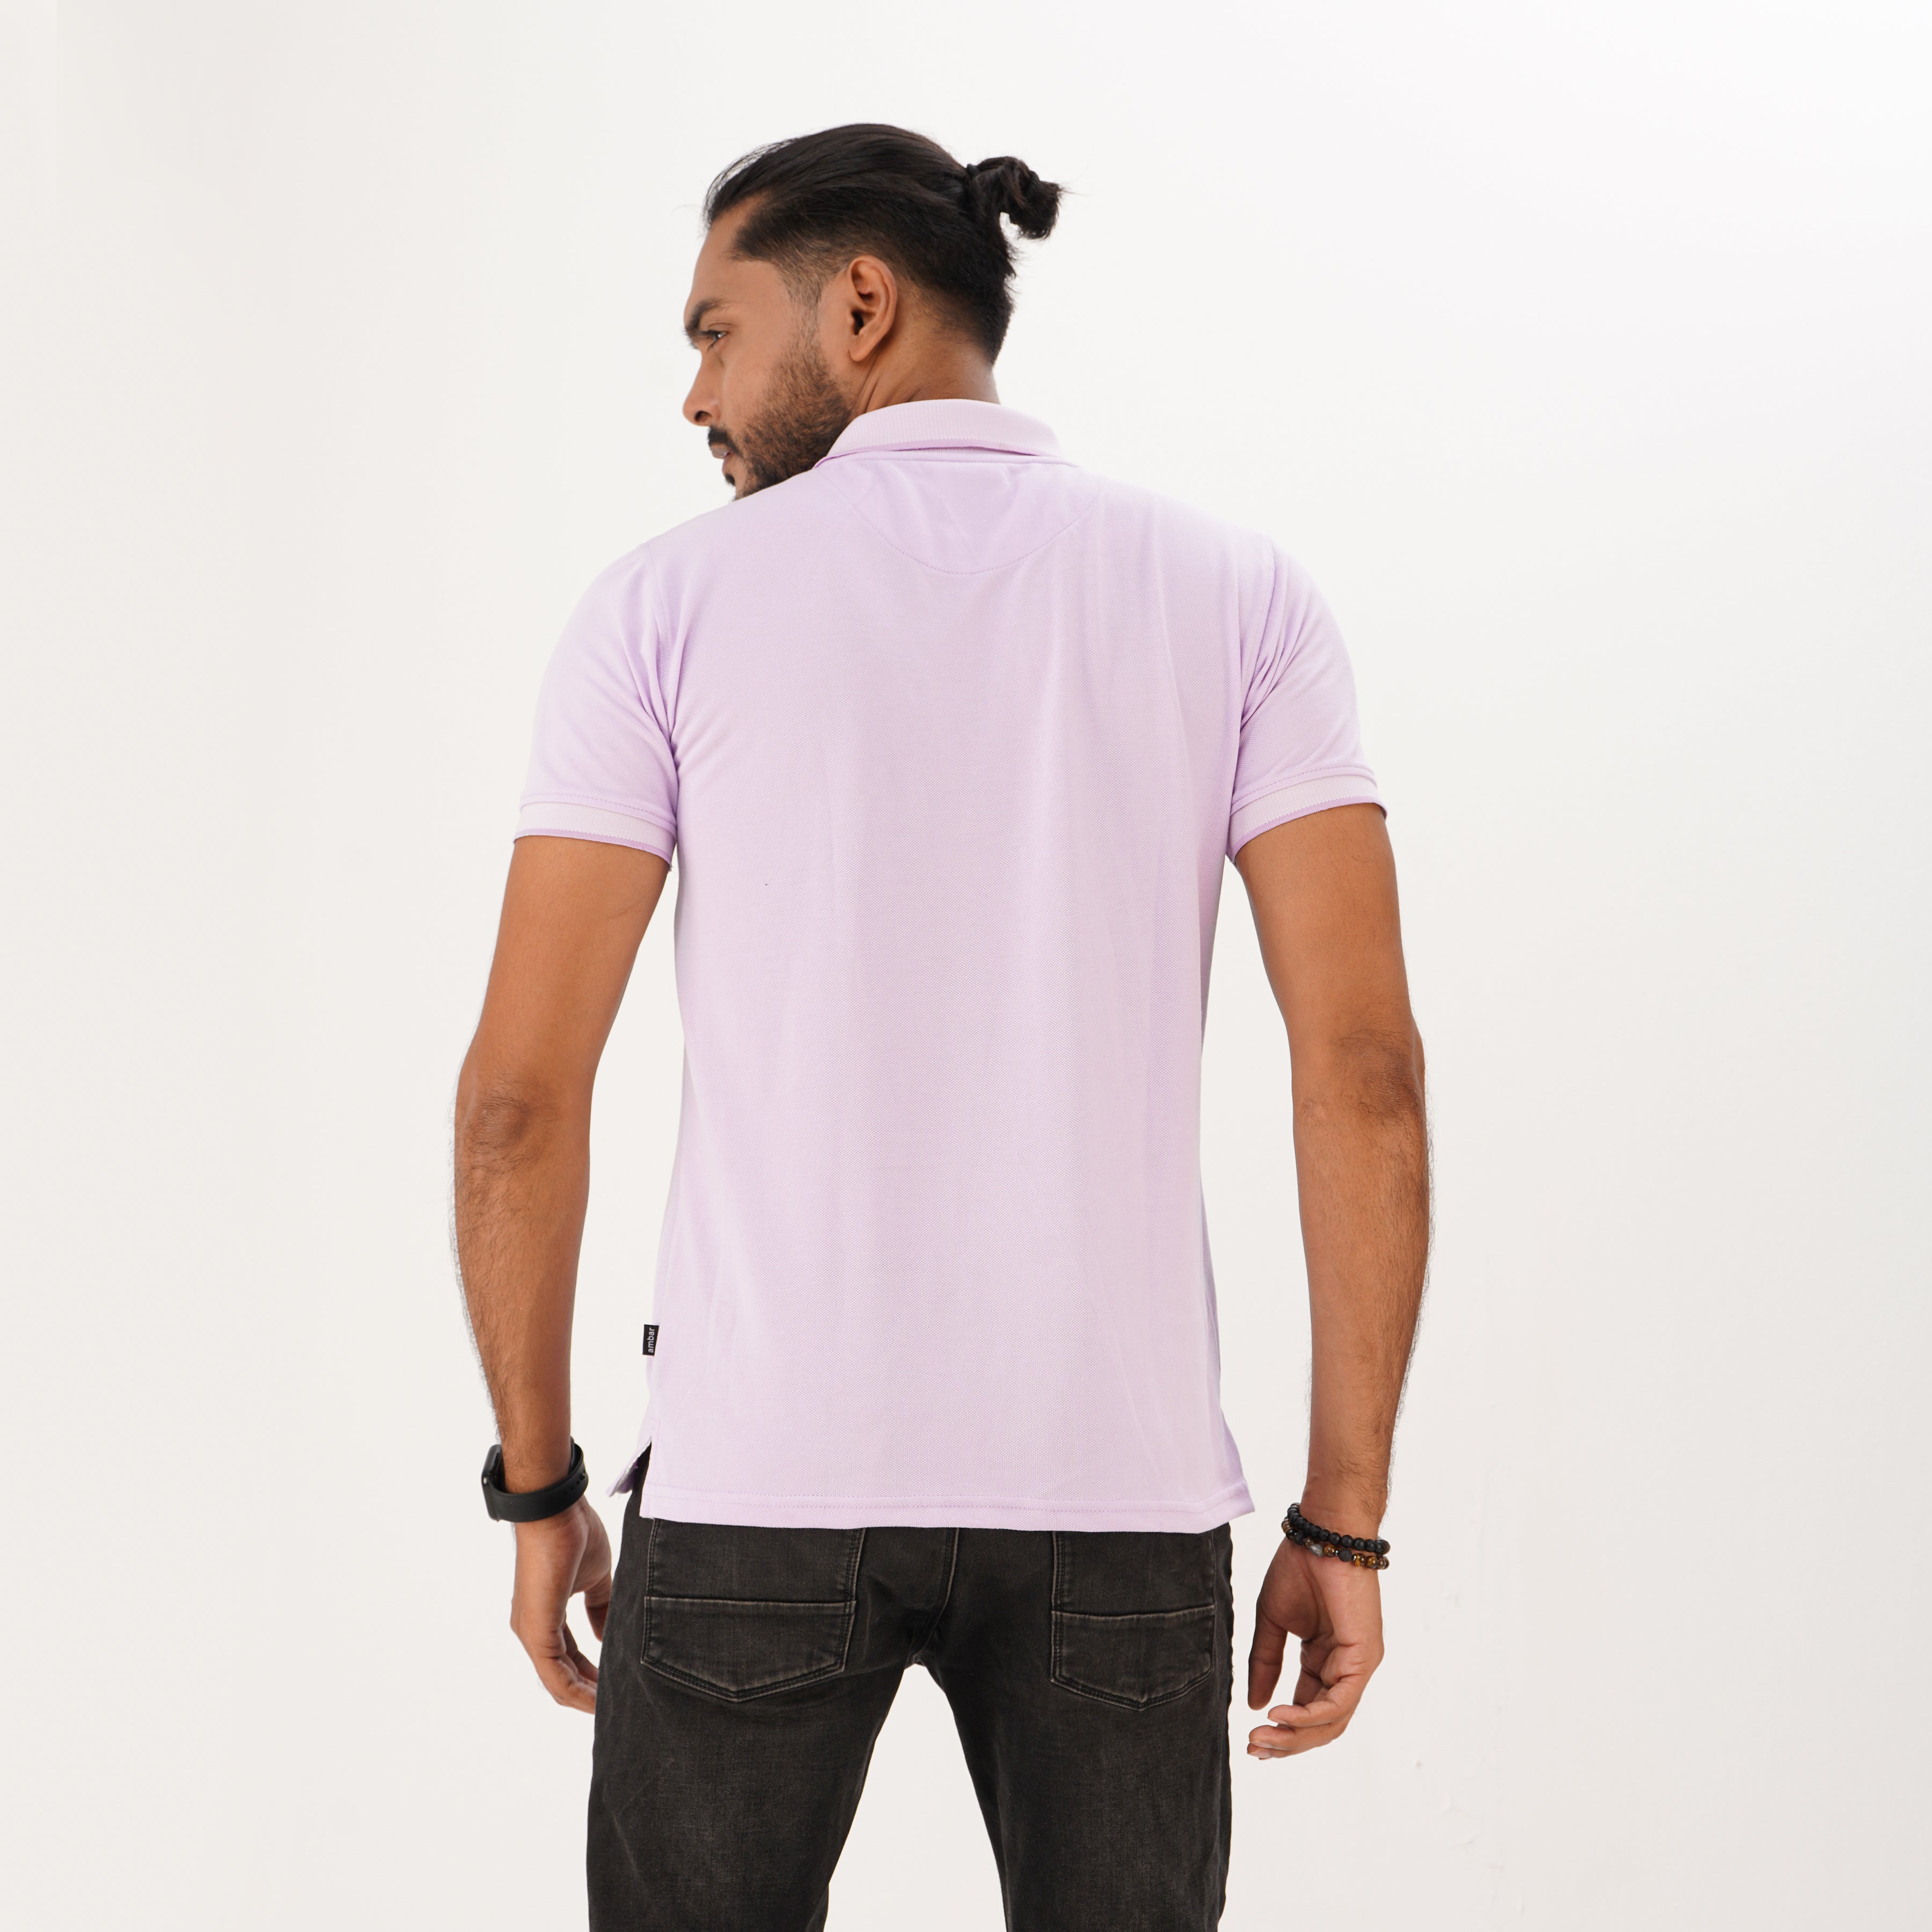 Polo Shirt for Men | Solid Light Purple Polo